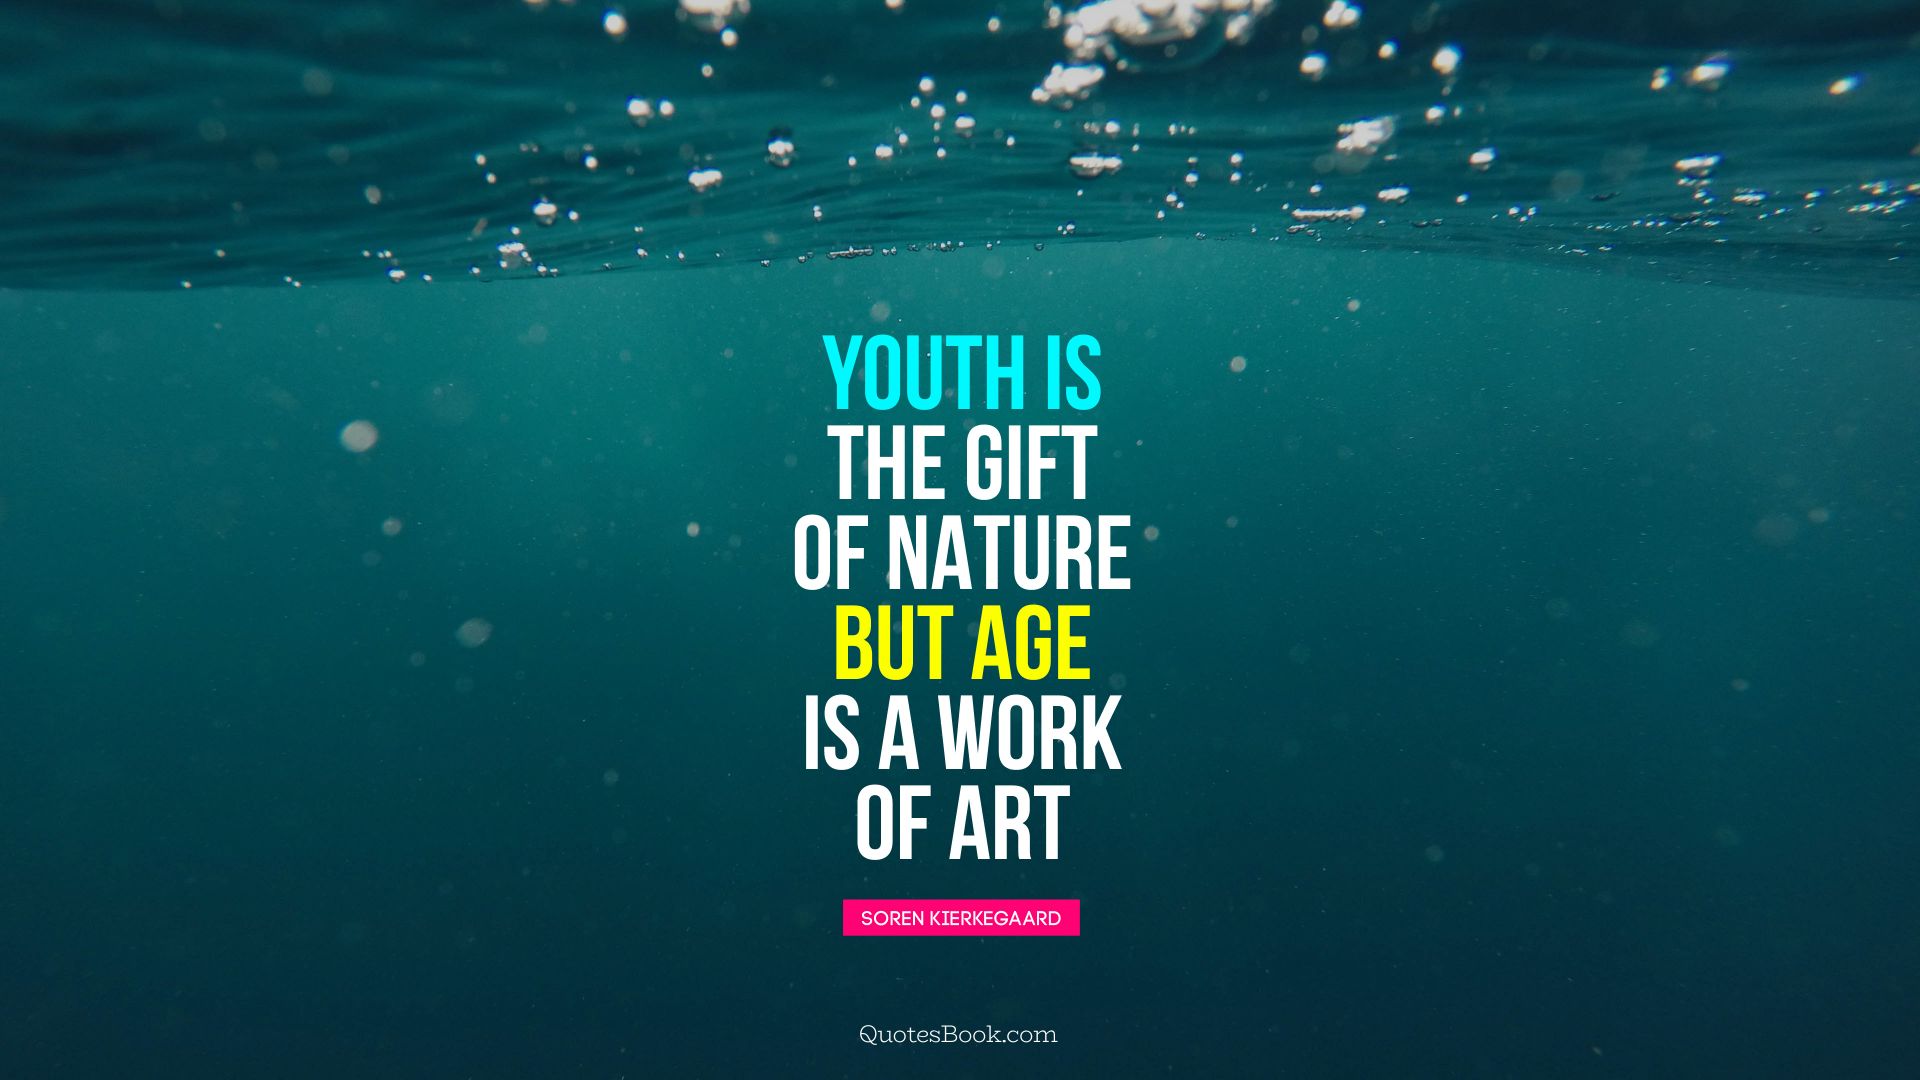 Youth is the gift of nature, but age is a work of art
. - Quote by Soren Kierkegaard